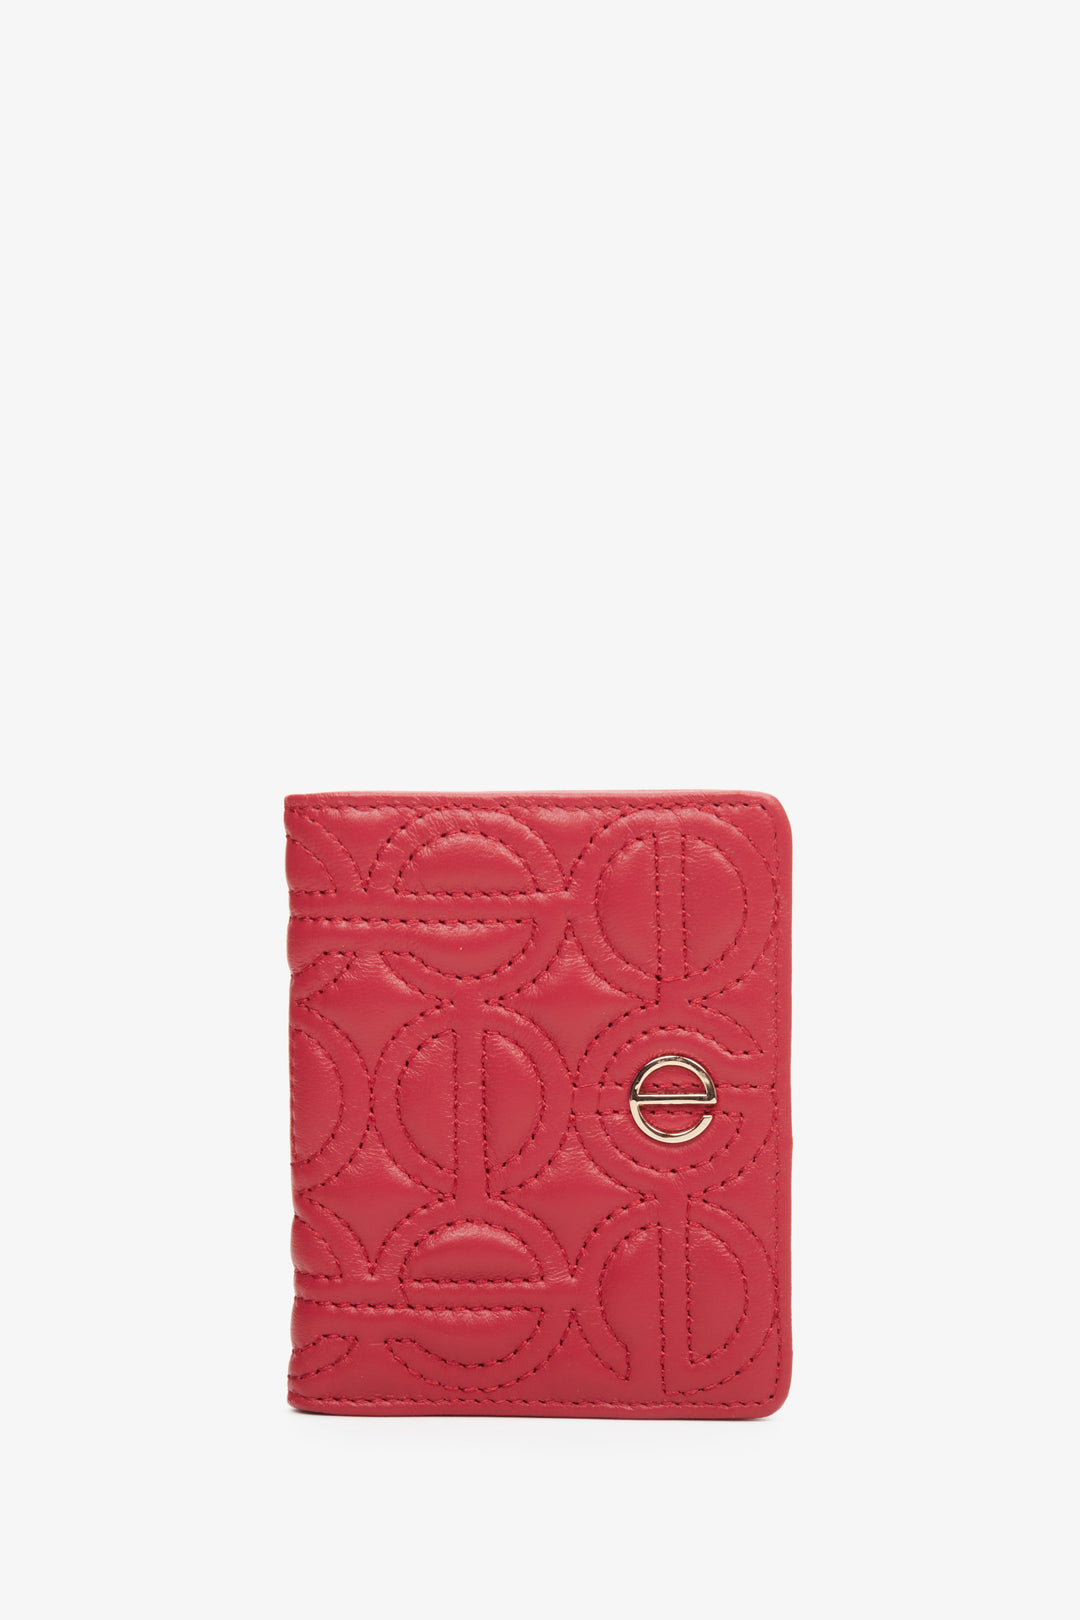 Women's Red Card Wallet made of Genuine Leather with Silver Accents Estro ER00113657.